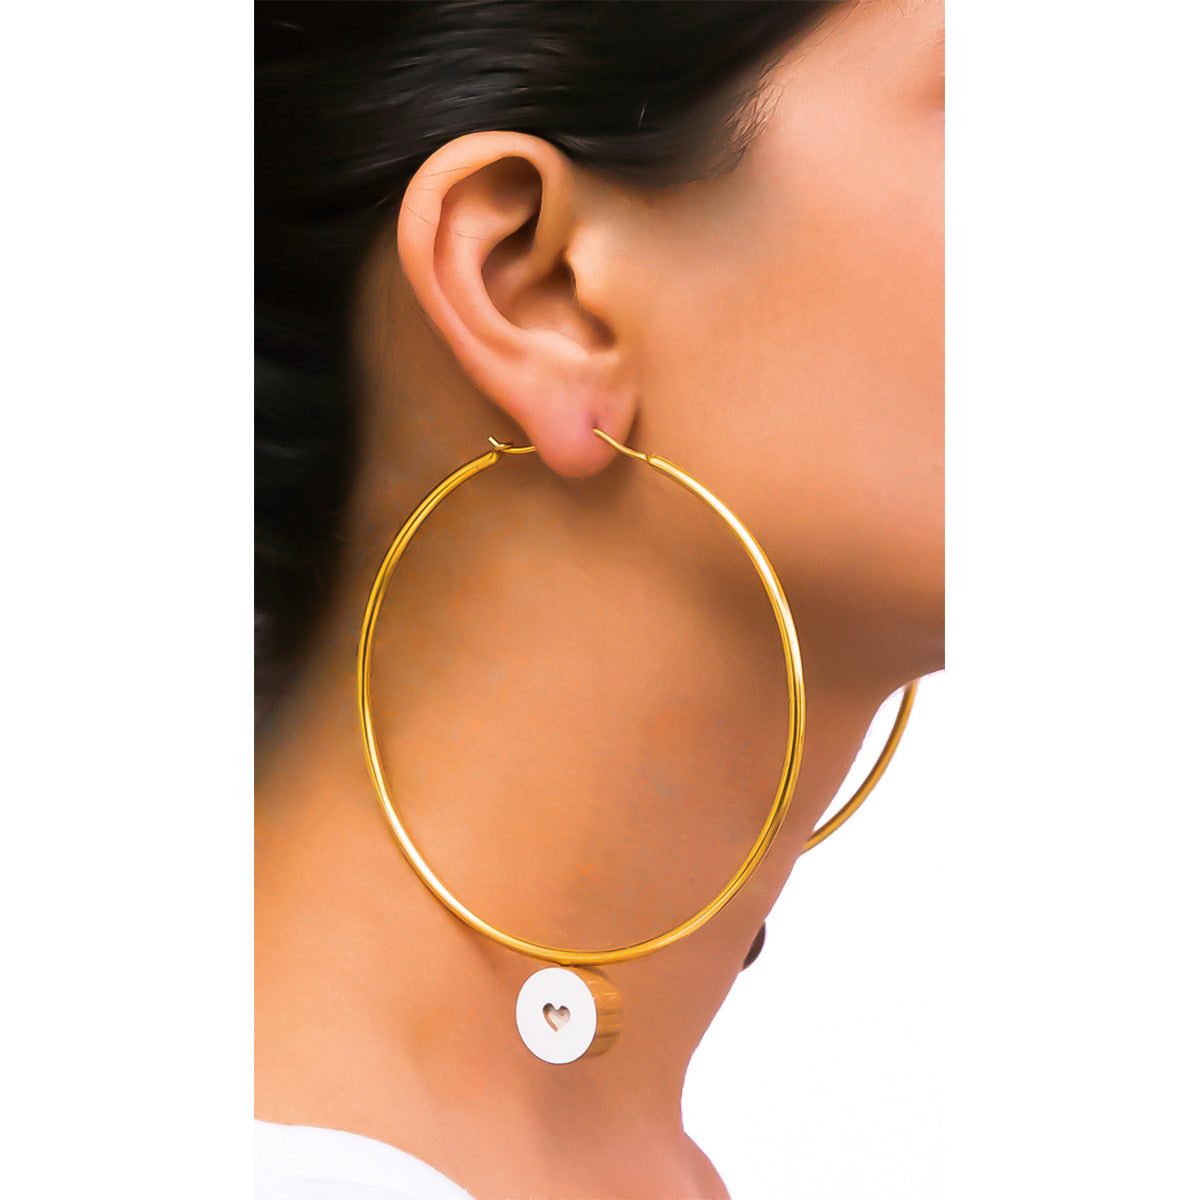 The earrings are handcrafted using reclaimed teak wood and gold plated brass.